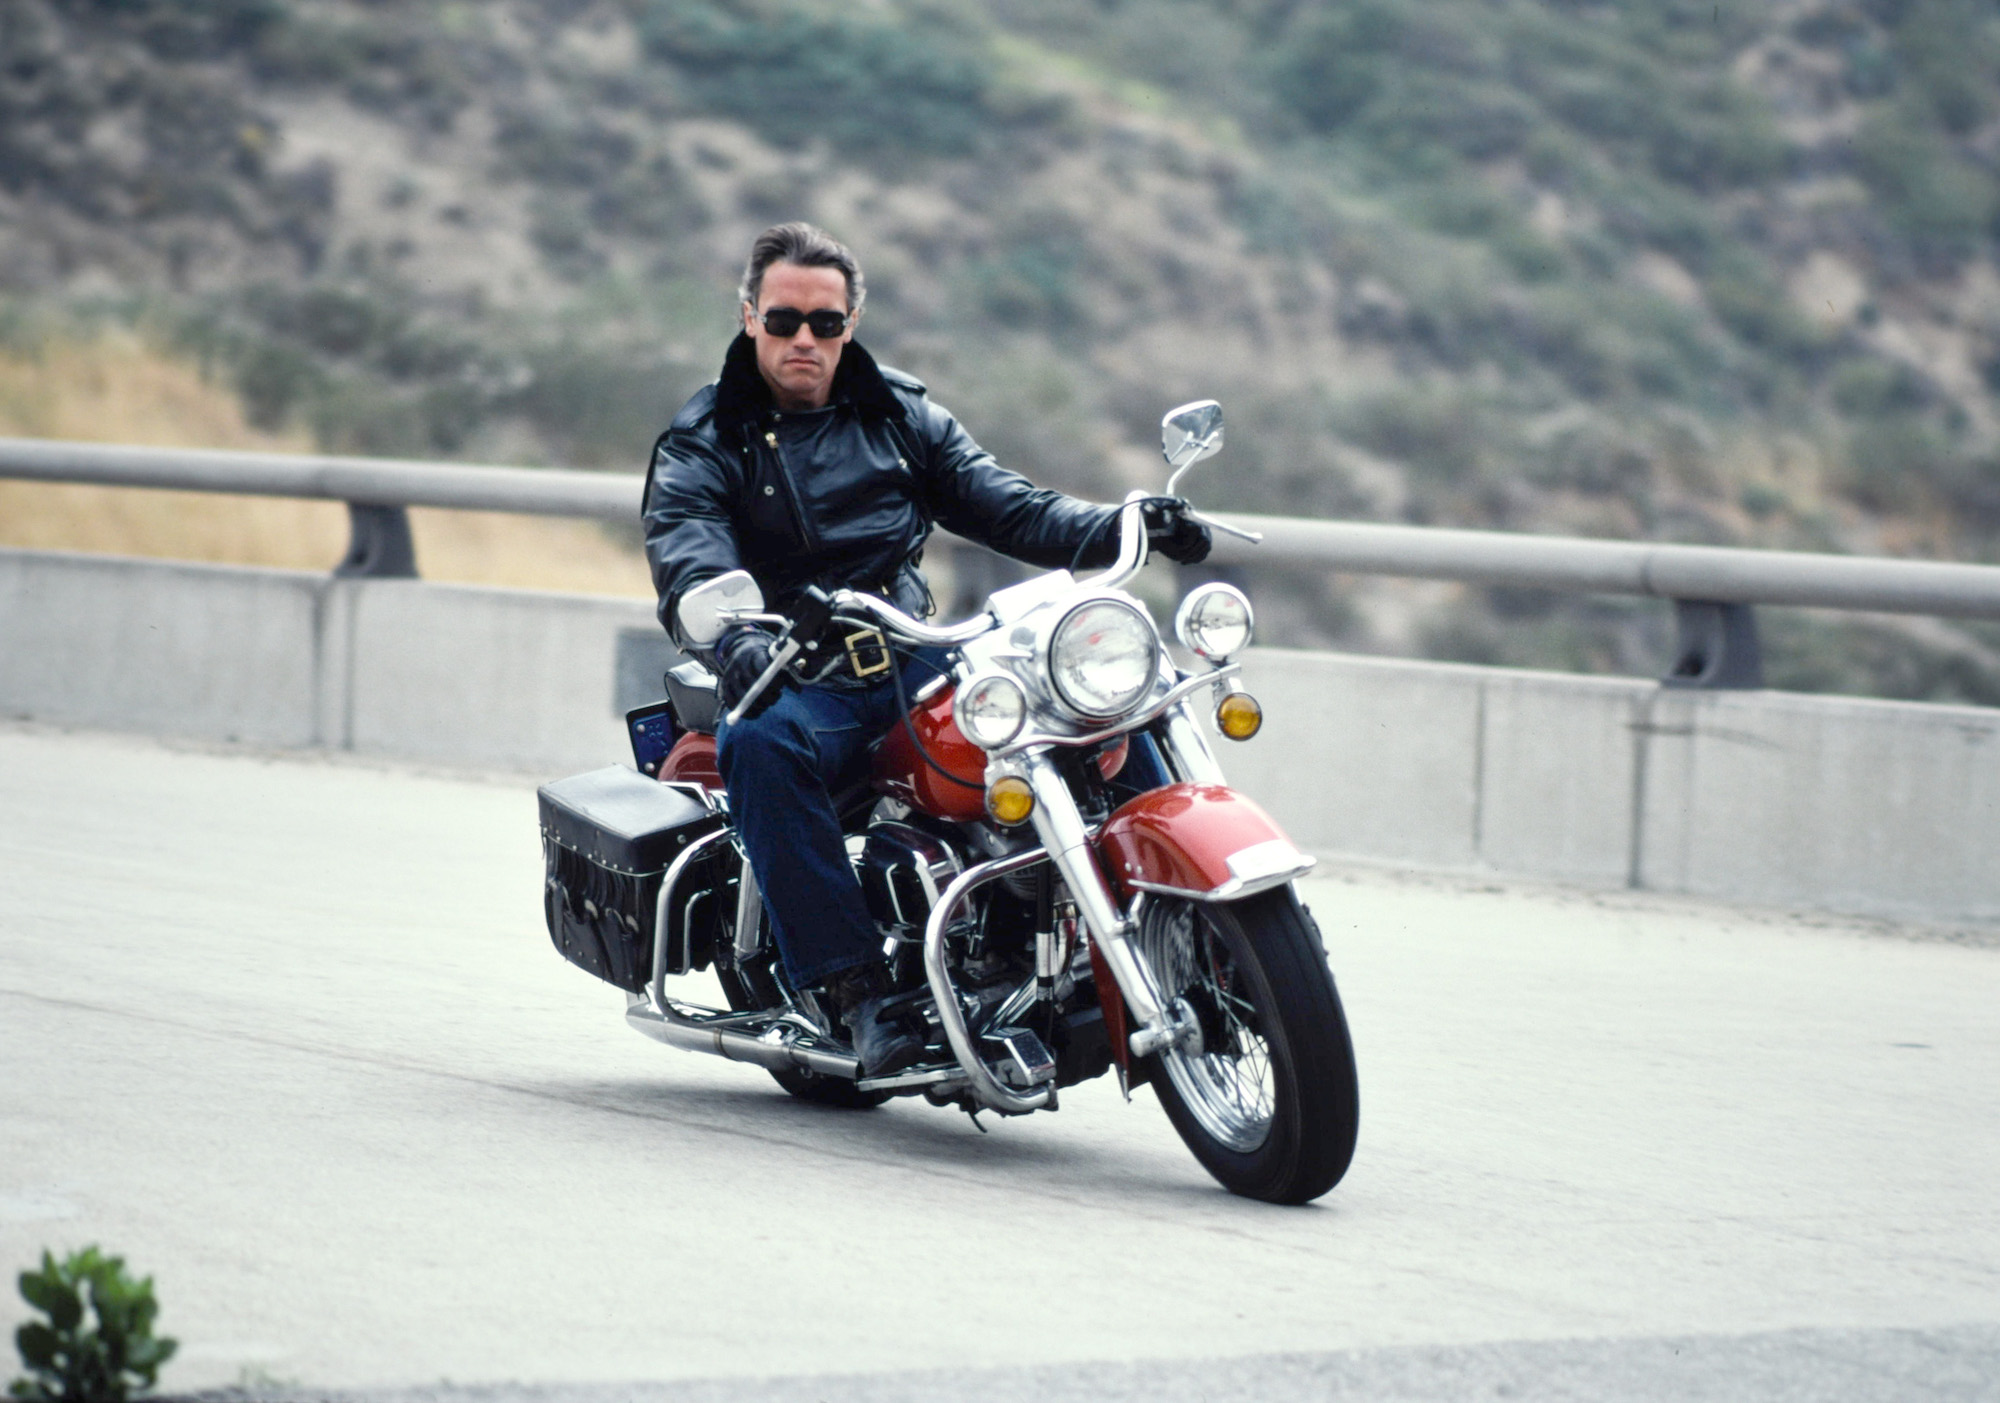 Arnold Schwarzenegger going around a corner faster on a motorcycle.